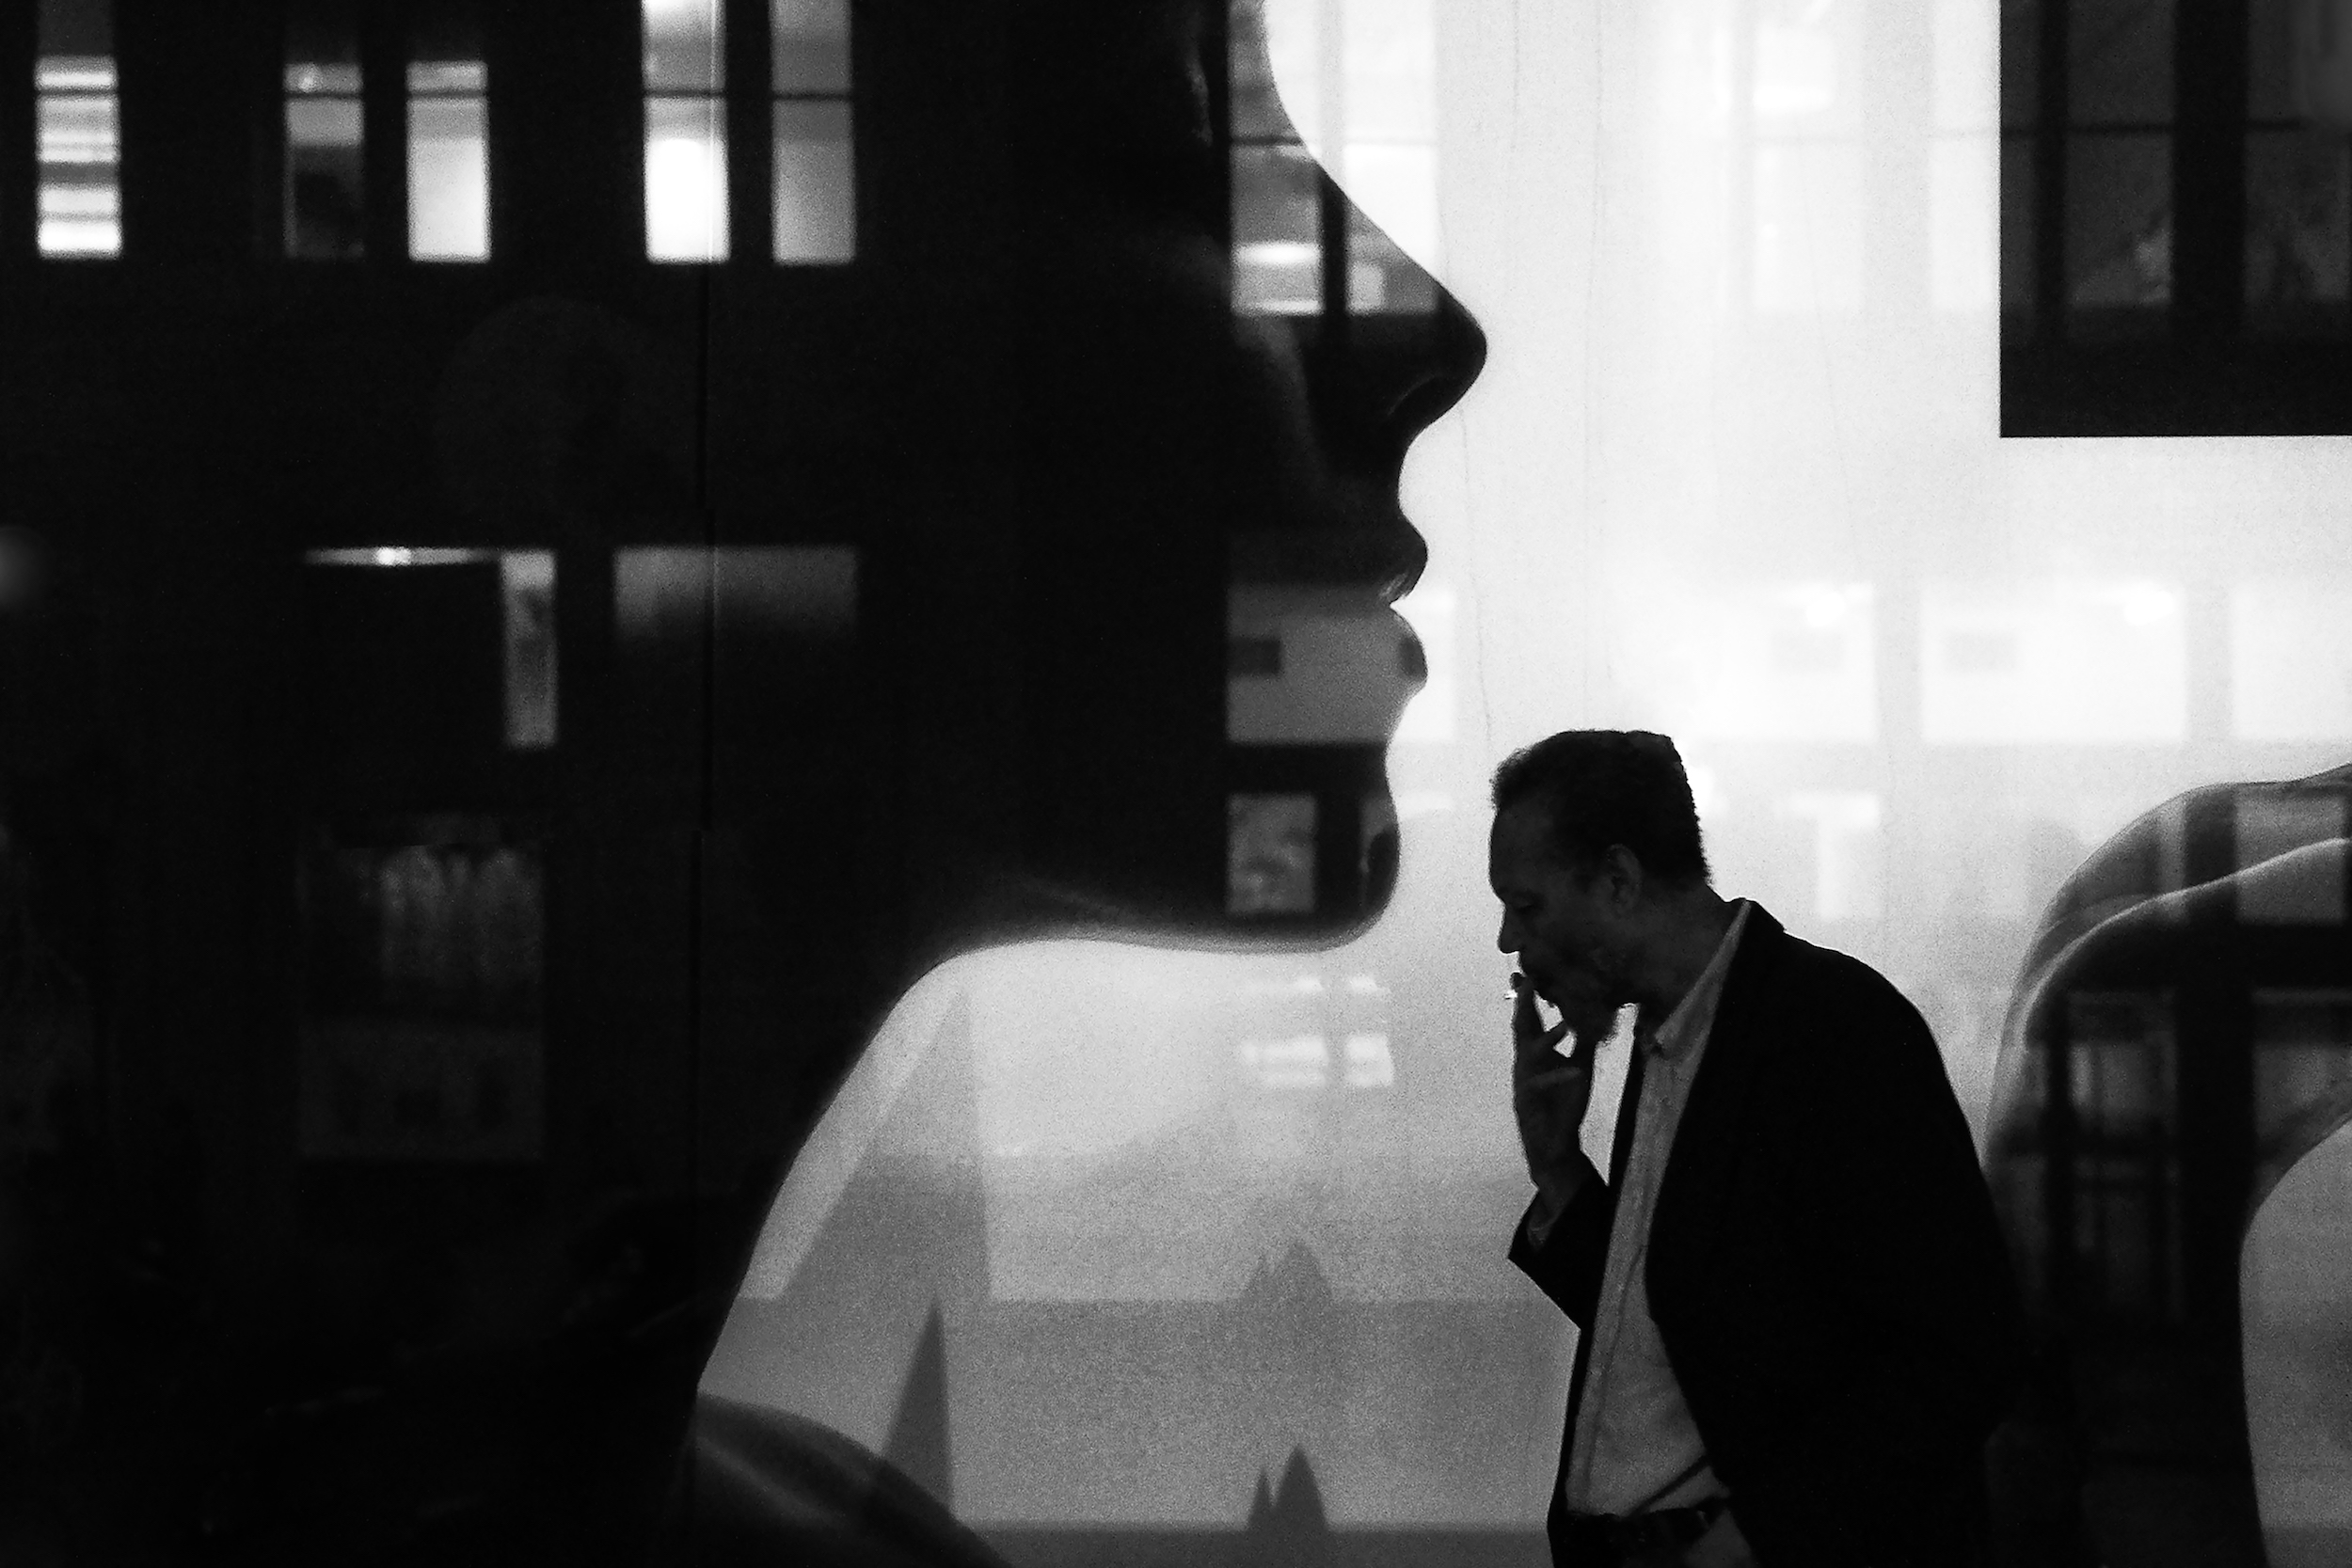 Melissa Breyer’s Street Photography Gives You That Timeless, Classic Feel